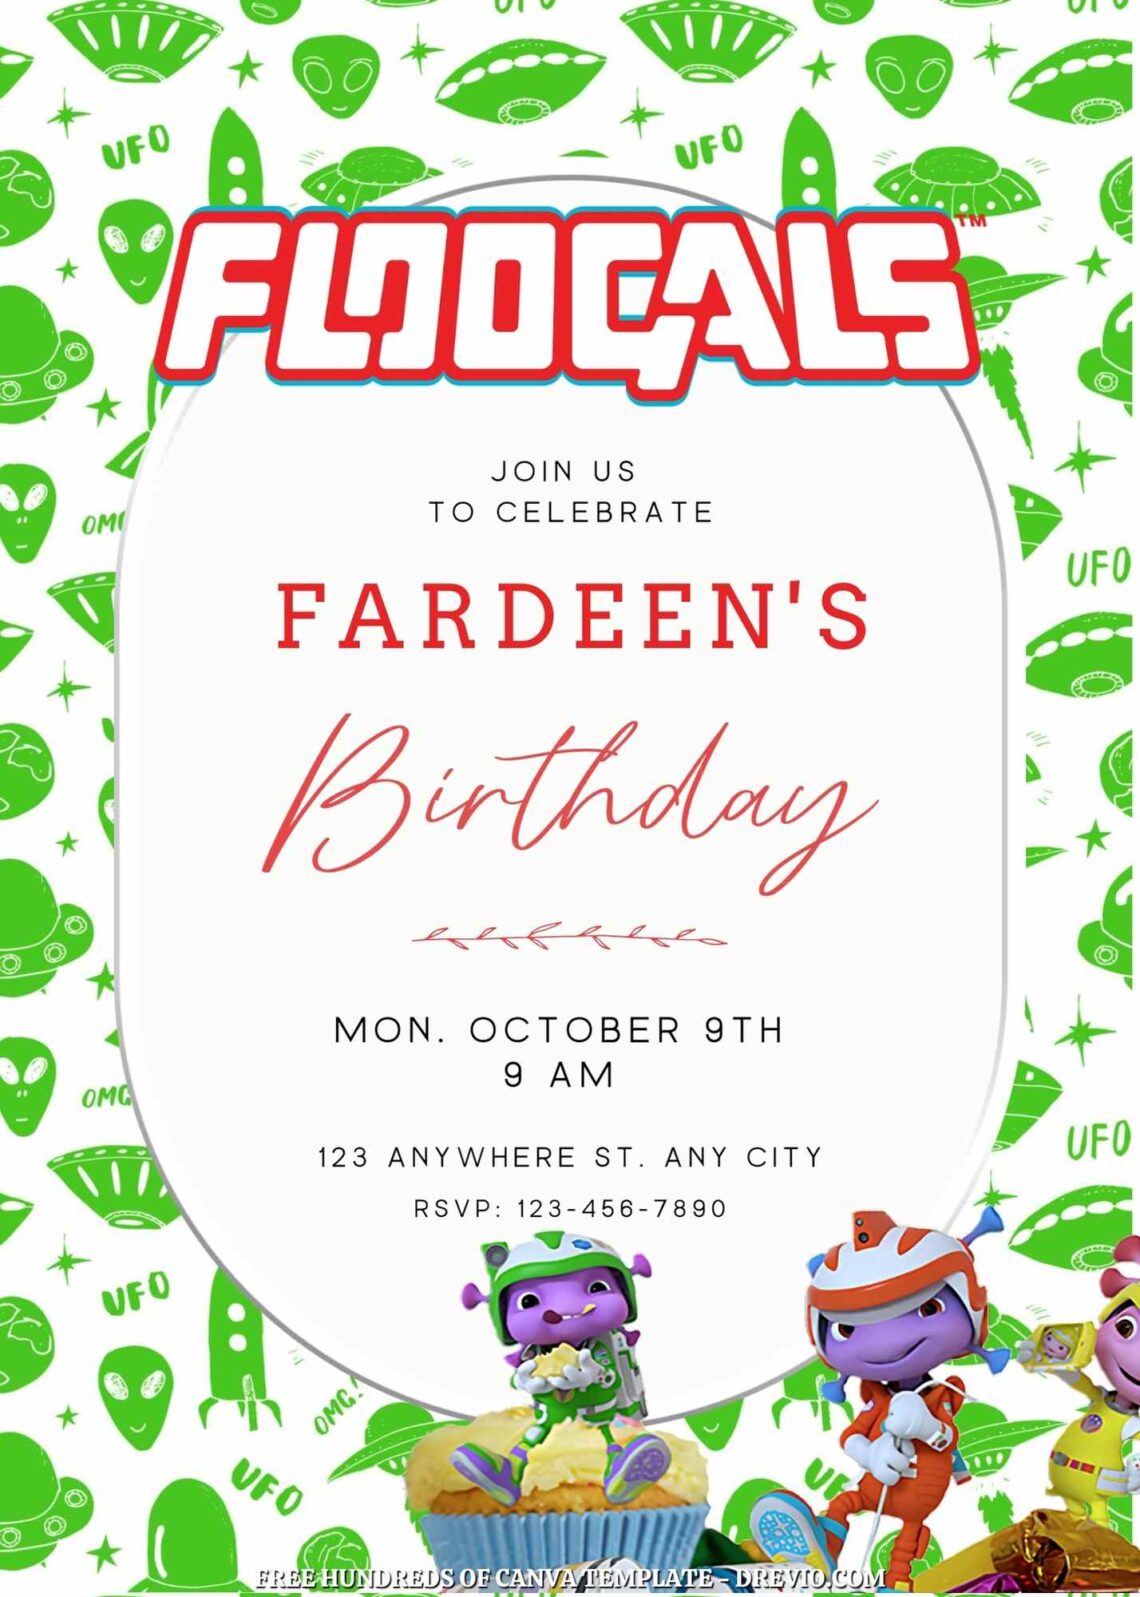 Free Floogals Birthday Invitation Templates with Green Spaceship in the Background